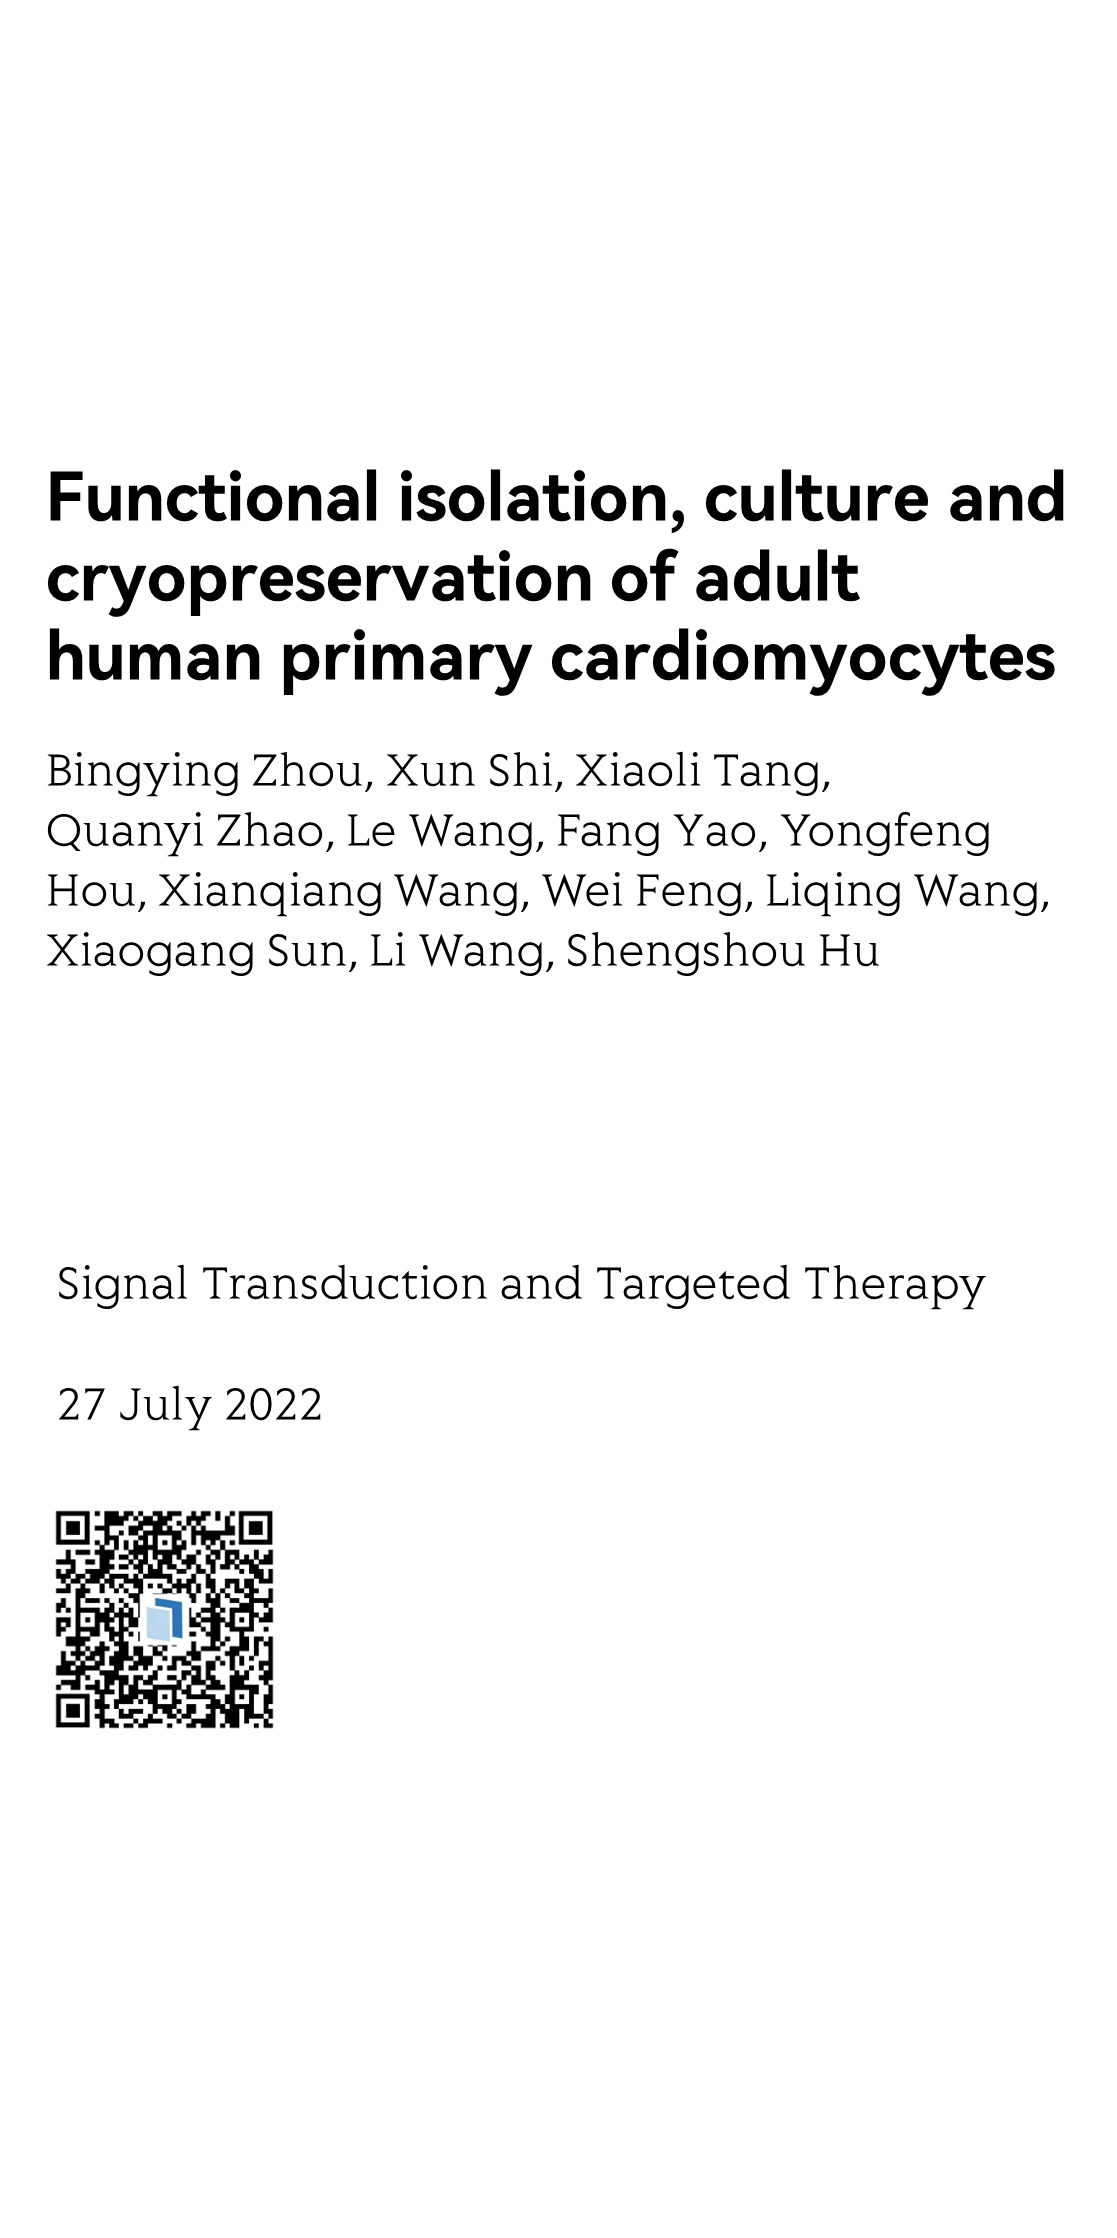 Functional isolation, culture and cryopreservation of adult human primary cardiomyocytes_1